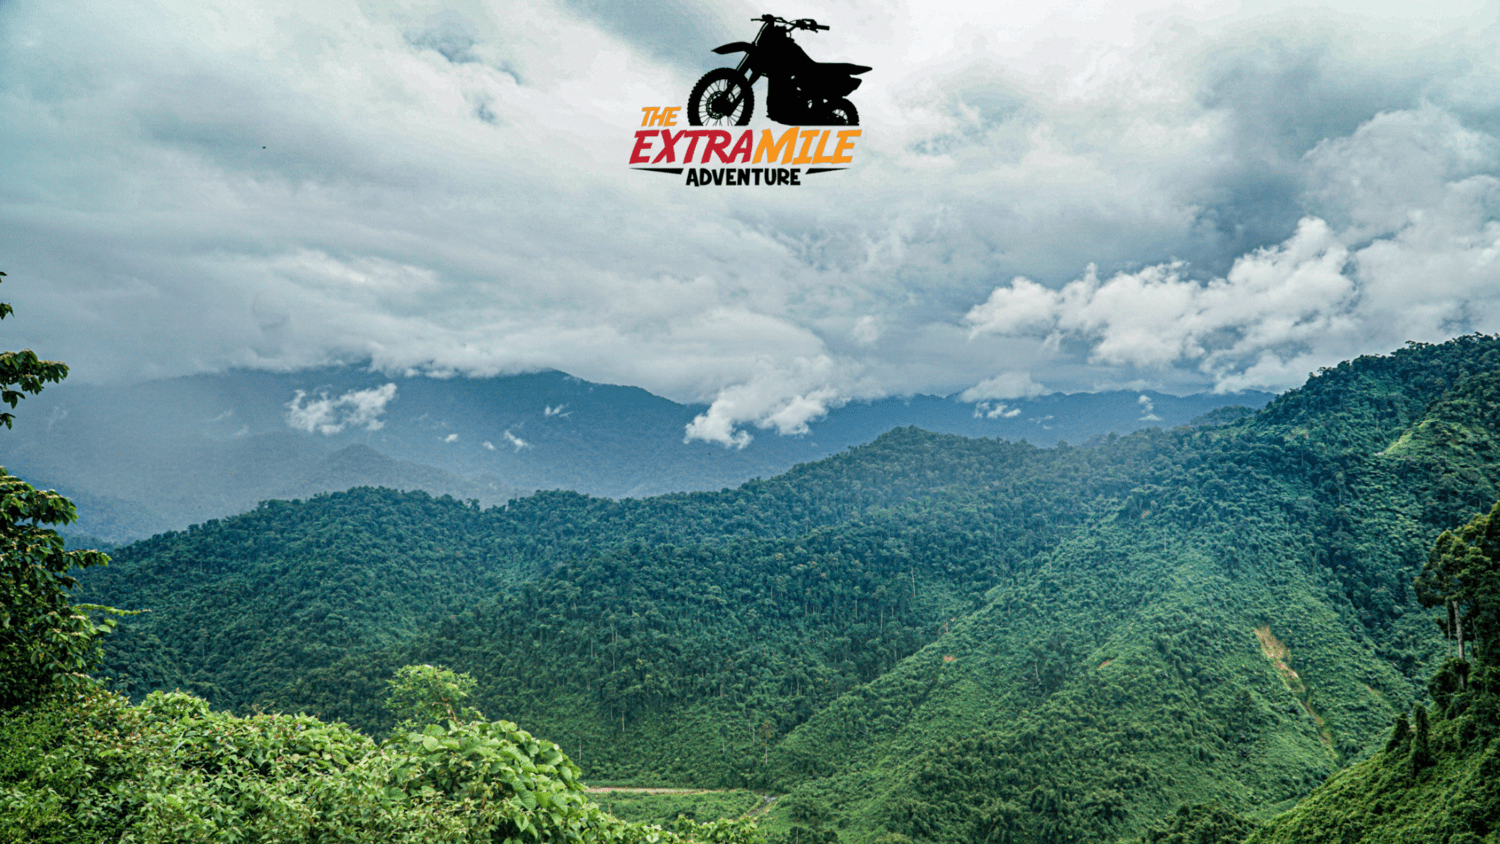 98 - CENTER - Quang Tri - mountain cloud forest and stunning view The Extra Mile Adventure Motorbike Tours Vietnam